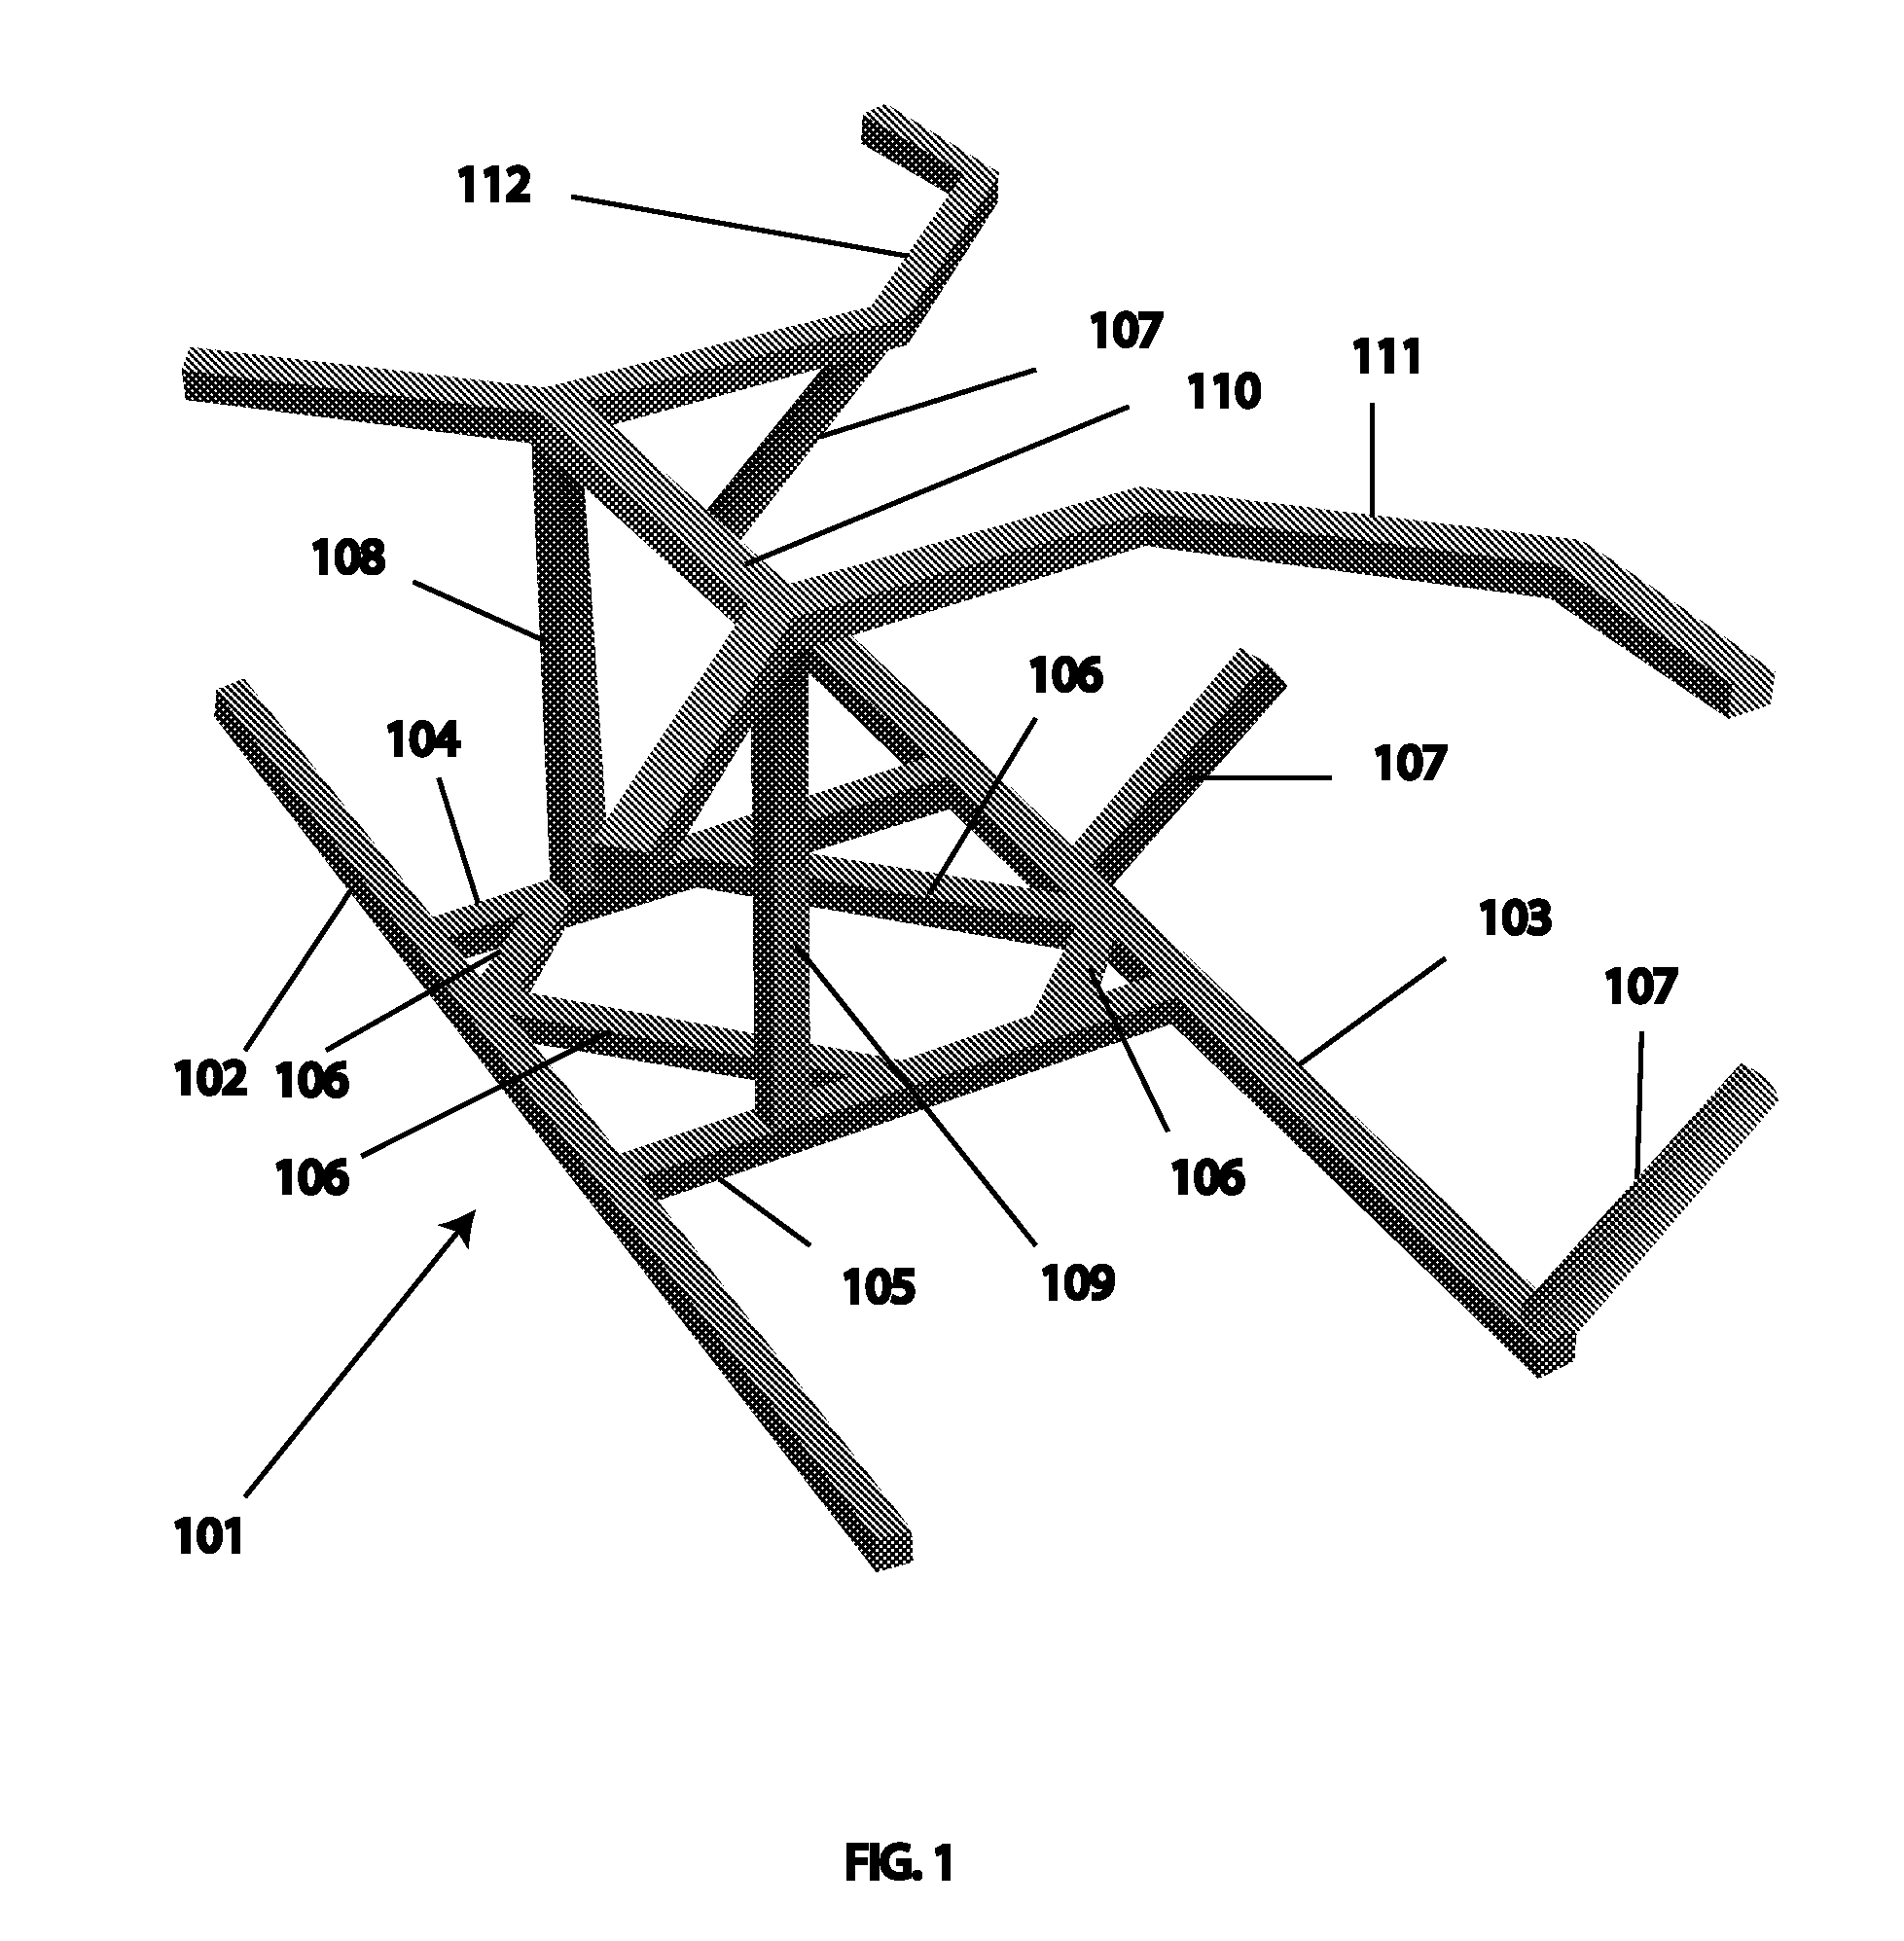 Log supporting and guiding apparatus for improved burning